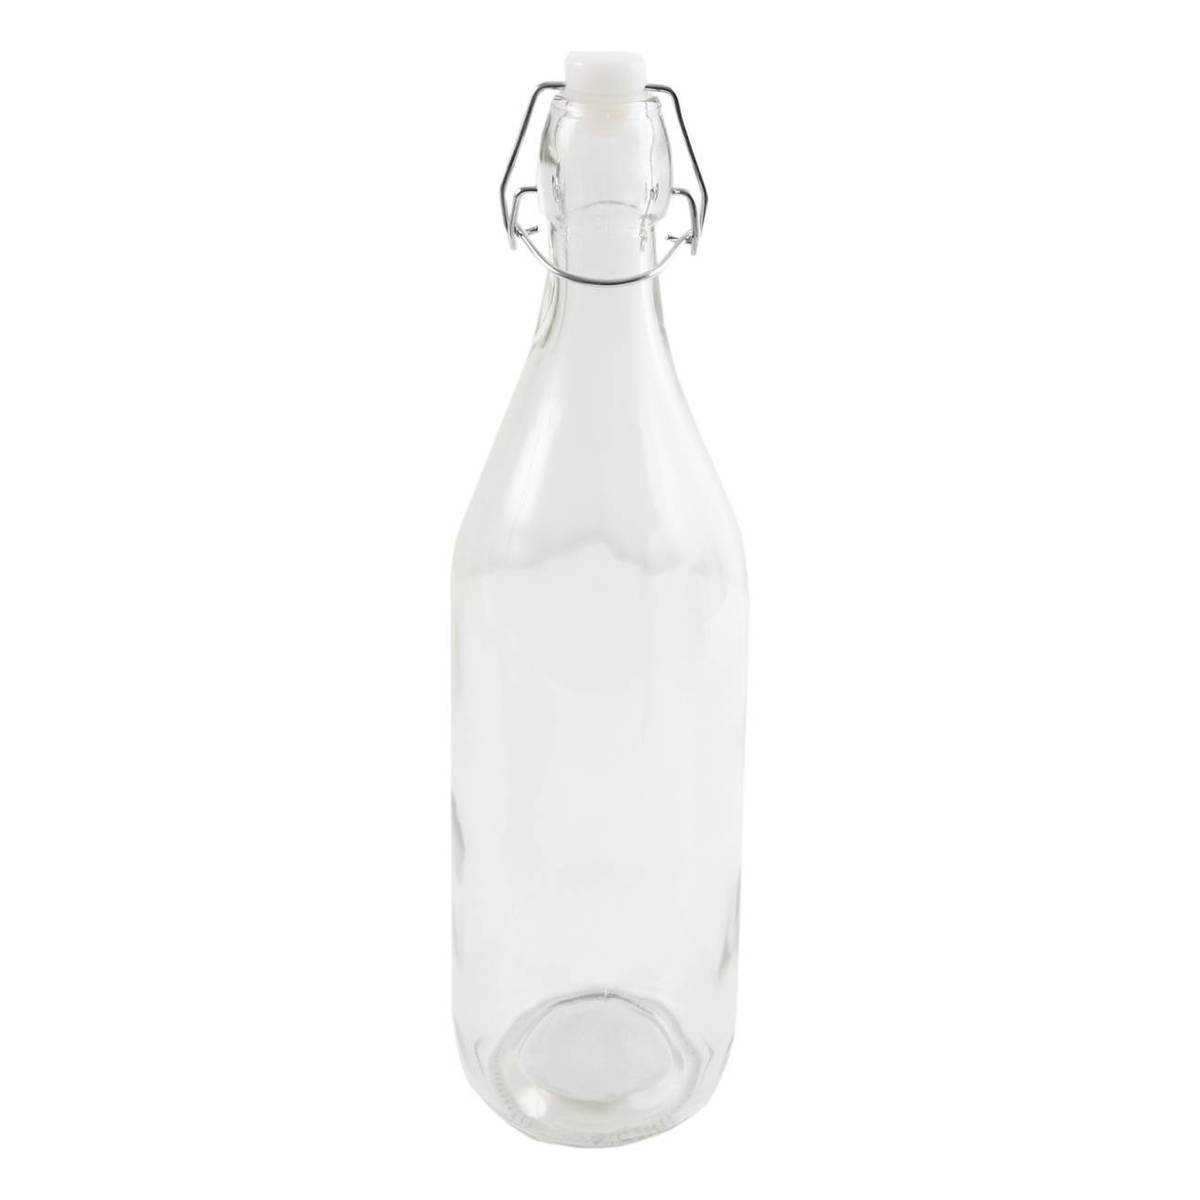 Clear Glass Bottle with Lid 1 Litre